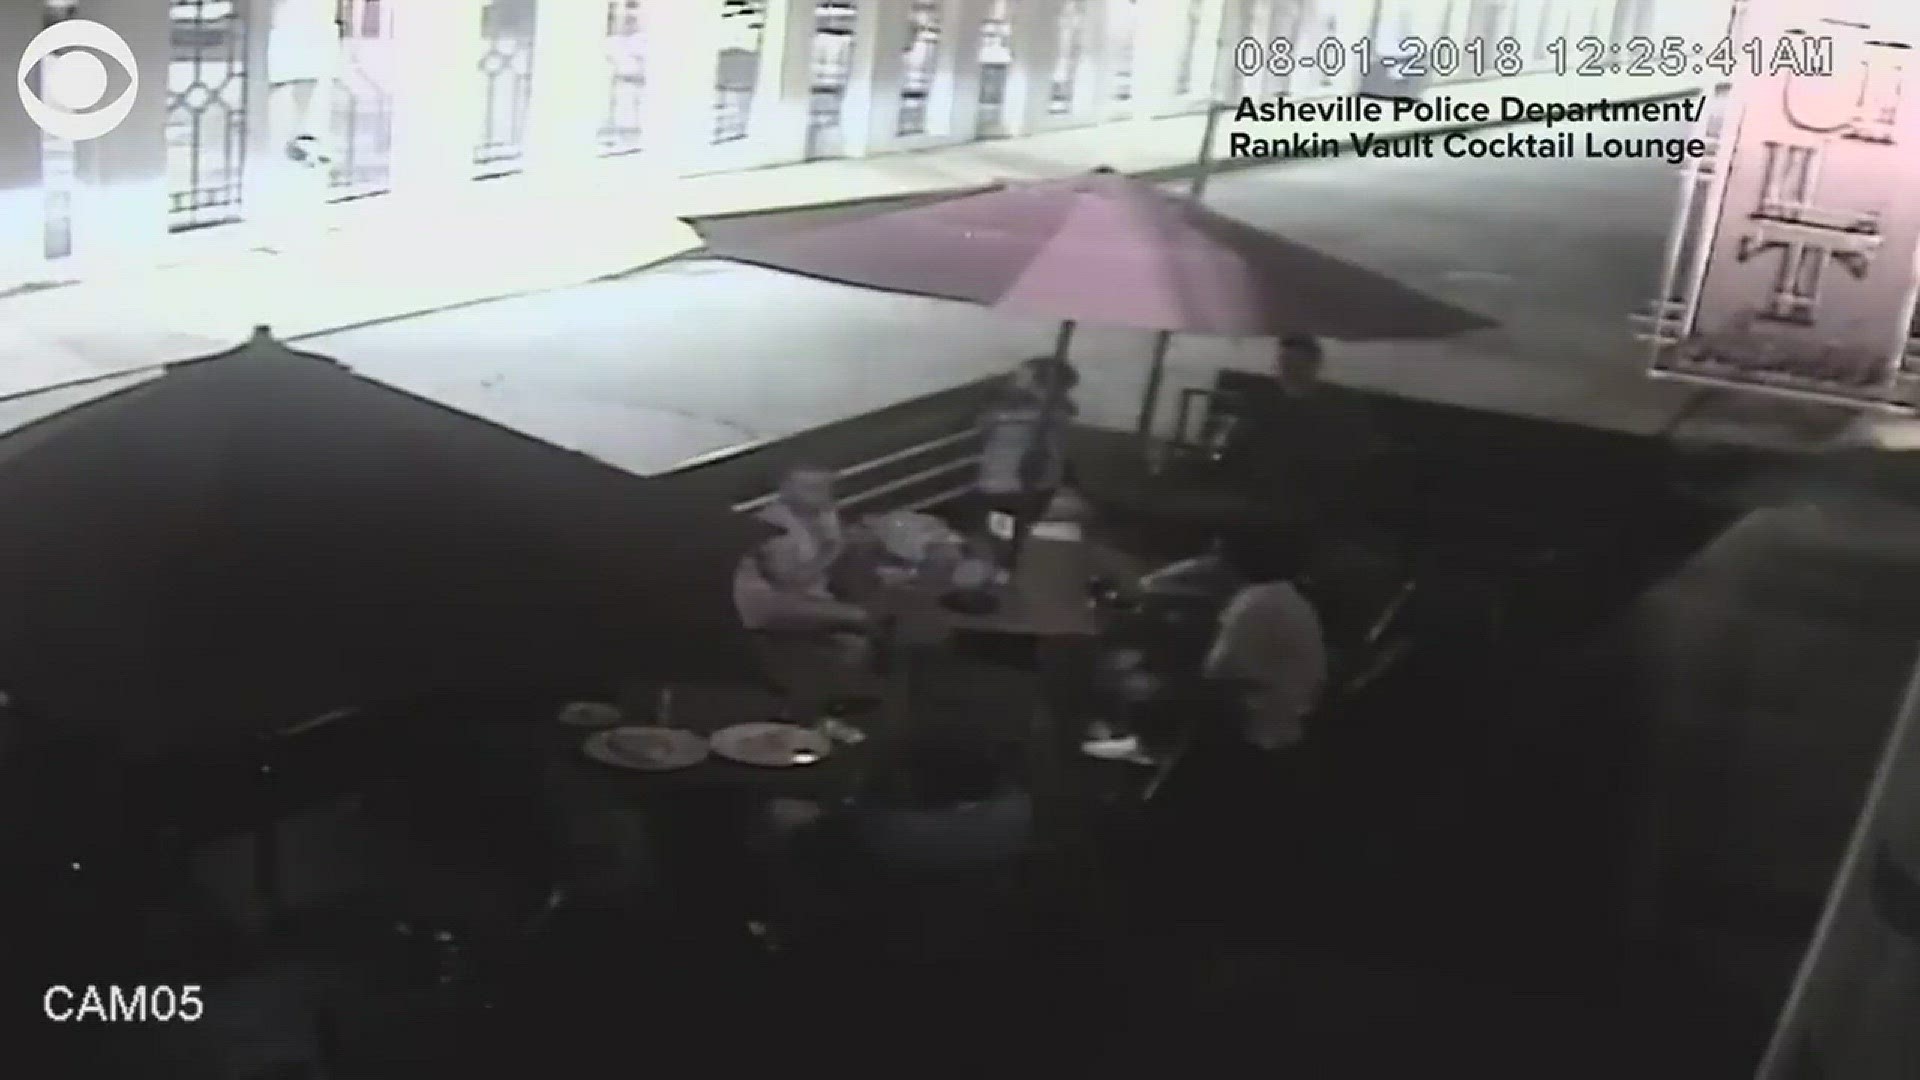 Asheville police released surveillance video showing an SUV whizzing past the patio tables just before the firework explodes, showing the area with sparks as people scramble for safety.